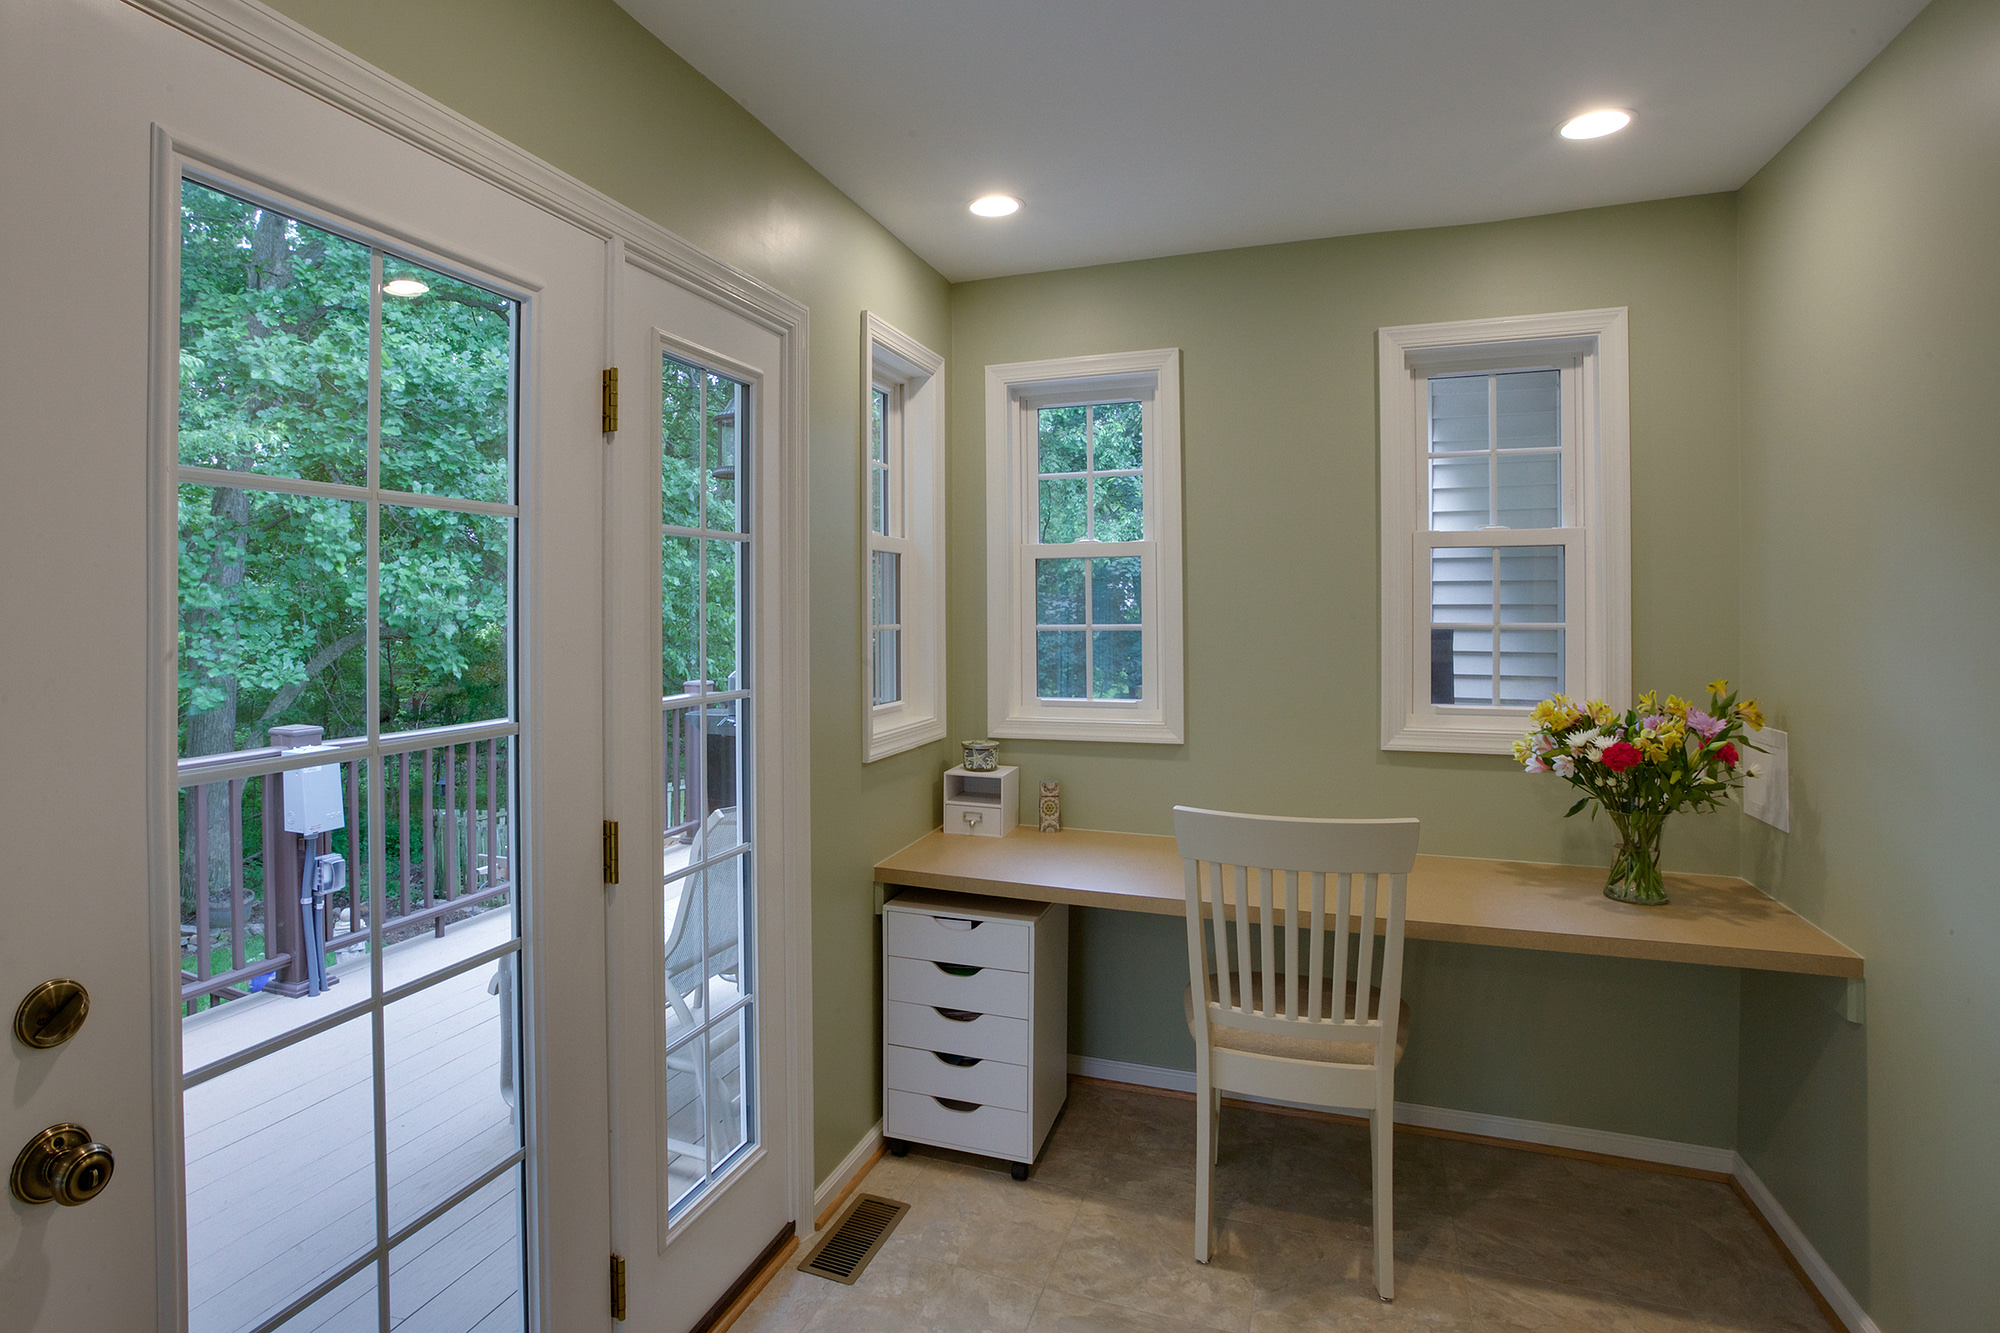 Home Remodeling project, home remodel, home addition, tile flooring, large windows, green walls, large ceilings, Northern Virginia remodeling, sitting table,